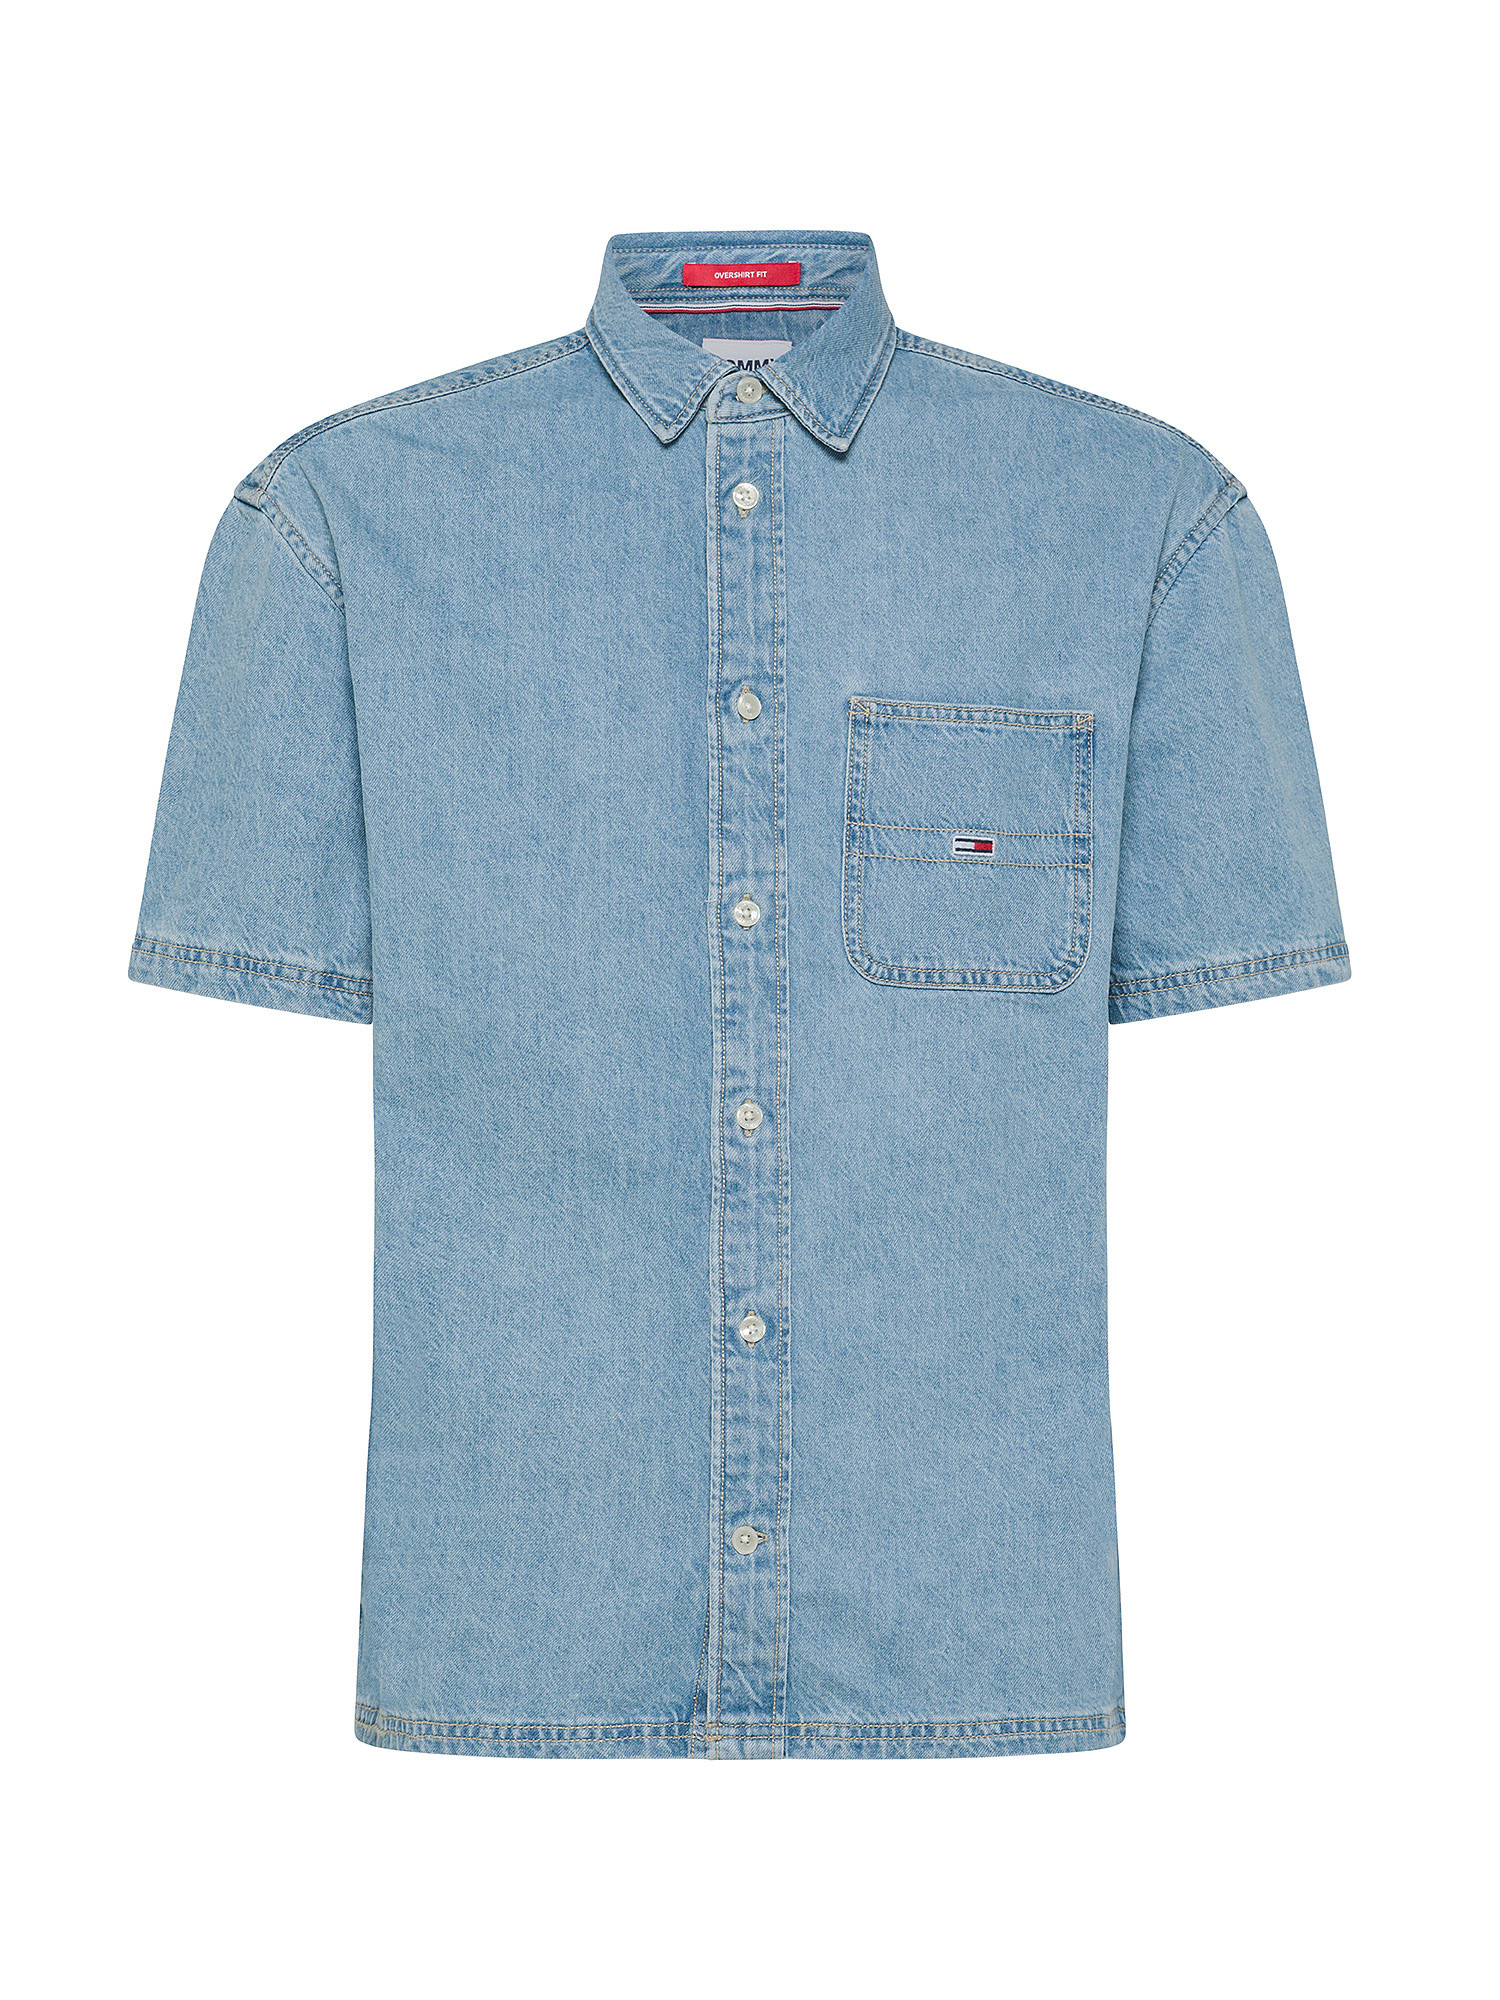 Tommy Jeans - Camicia in cotone con logo, Denim, large image number 0